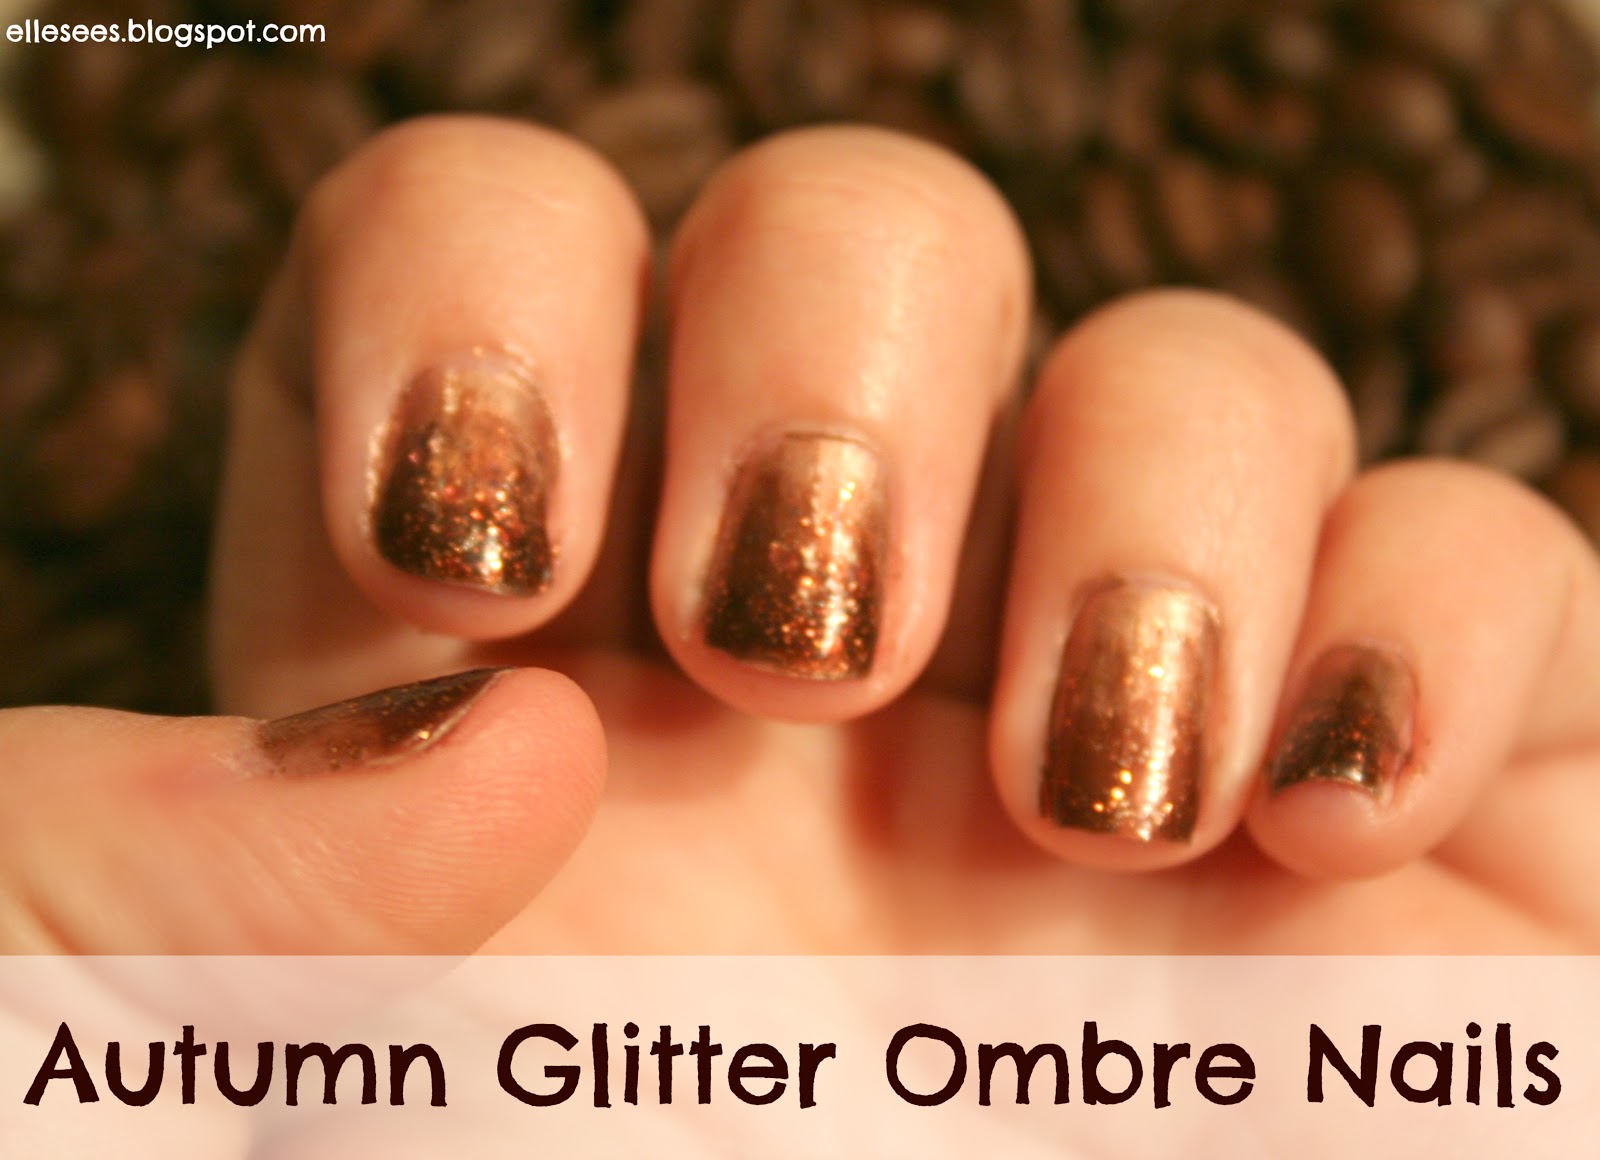 DIY Ombre Glitter Nails at Home - wide 3